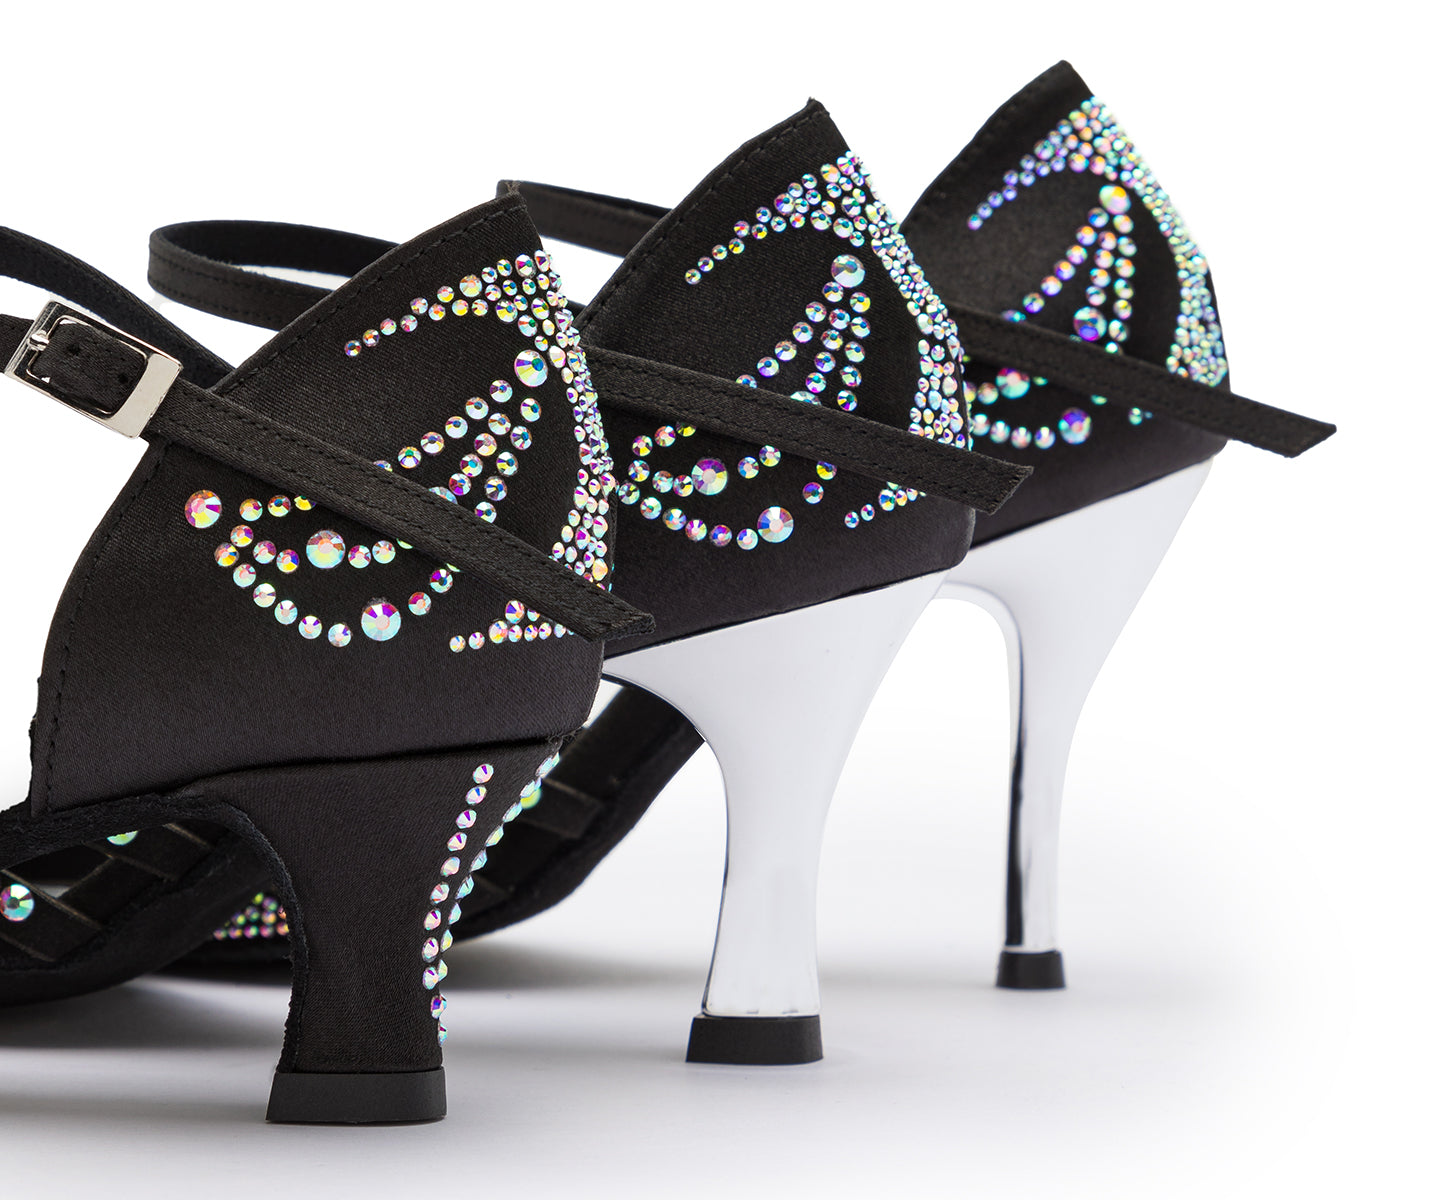 DQ L3m dance shoes in black with rhinestones